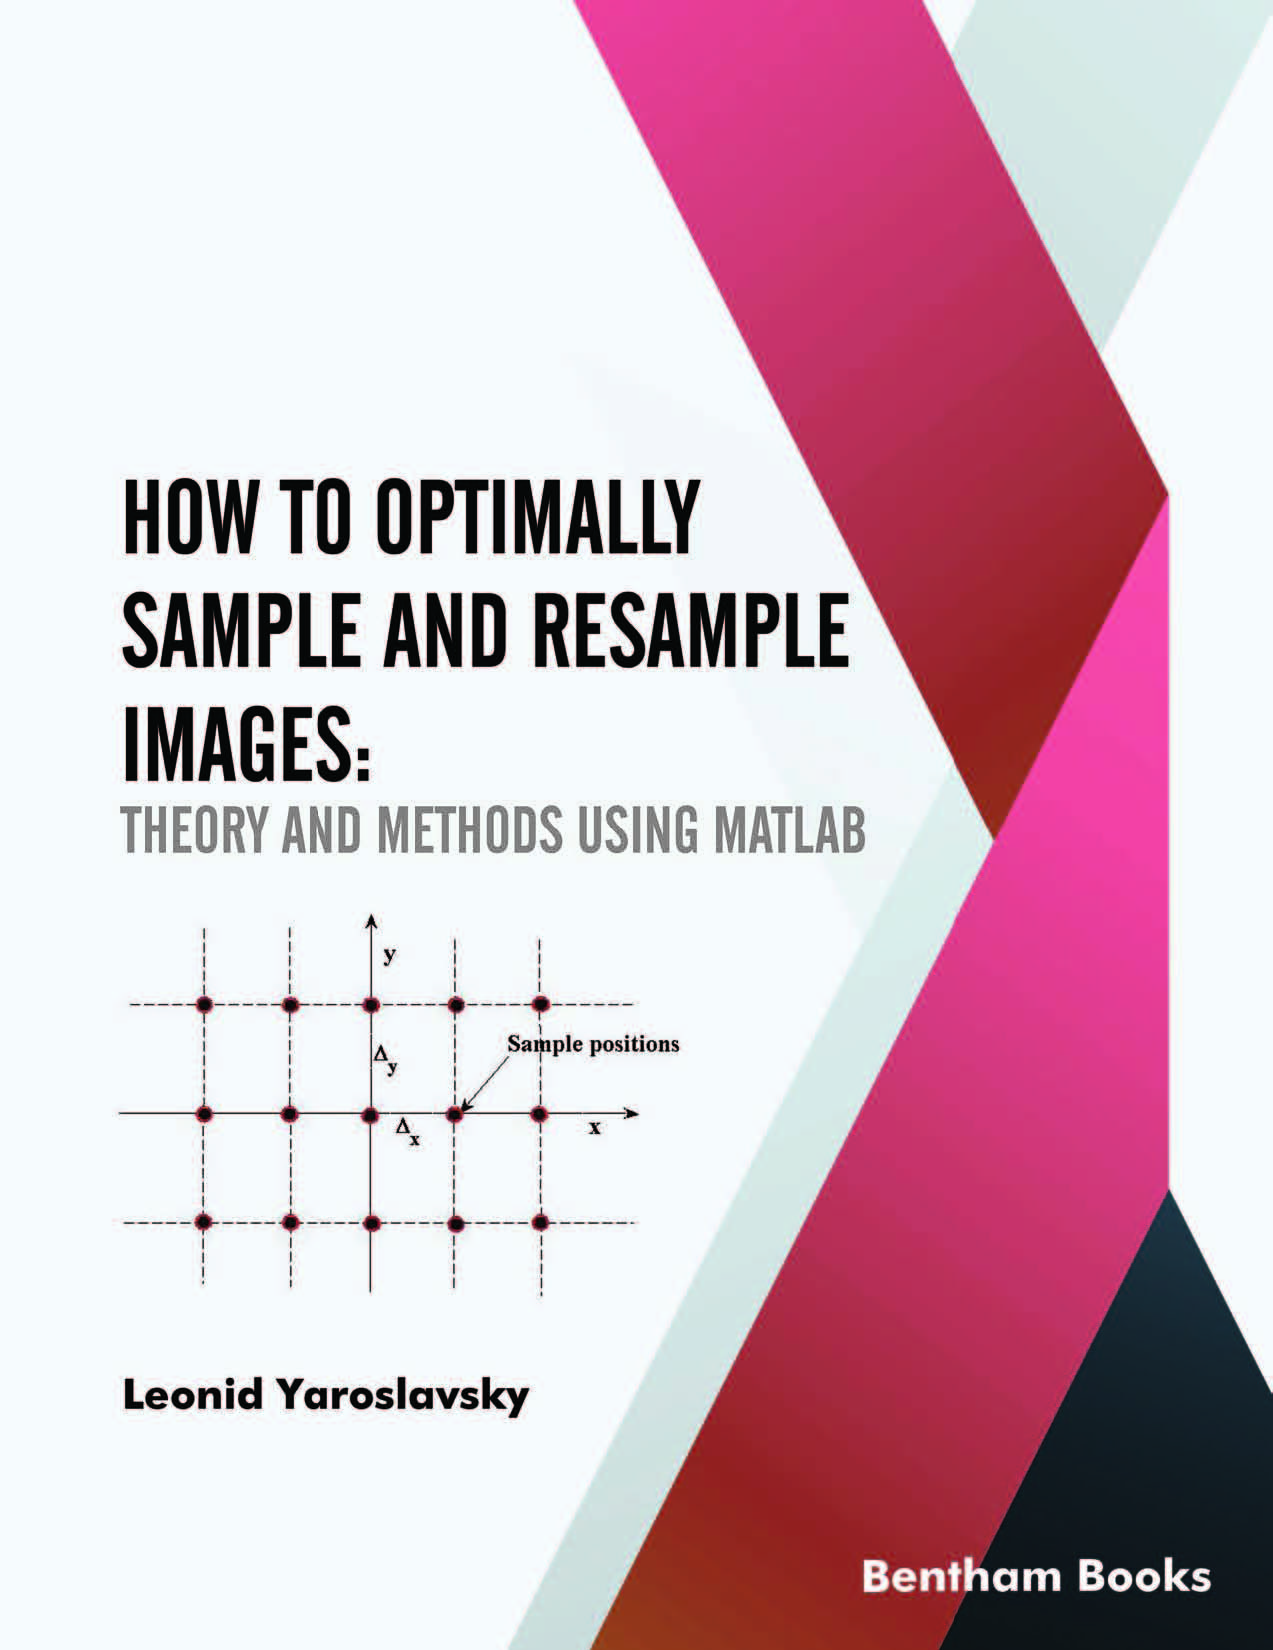 How to Optimally Sample and Resample Images: Theory and Methods Using Matlab